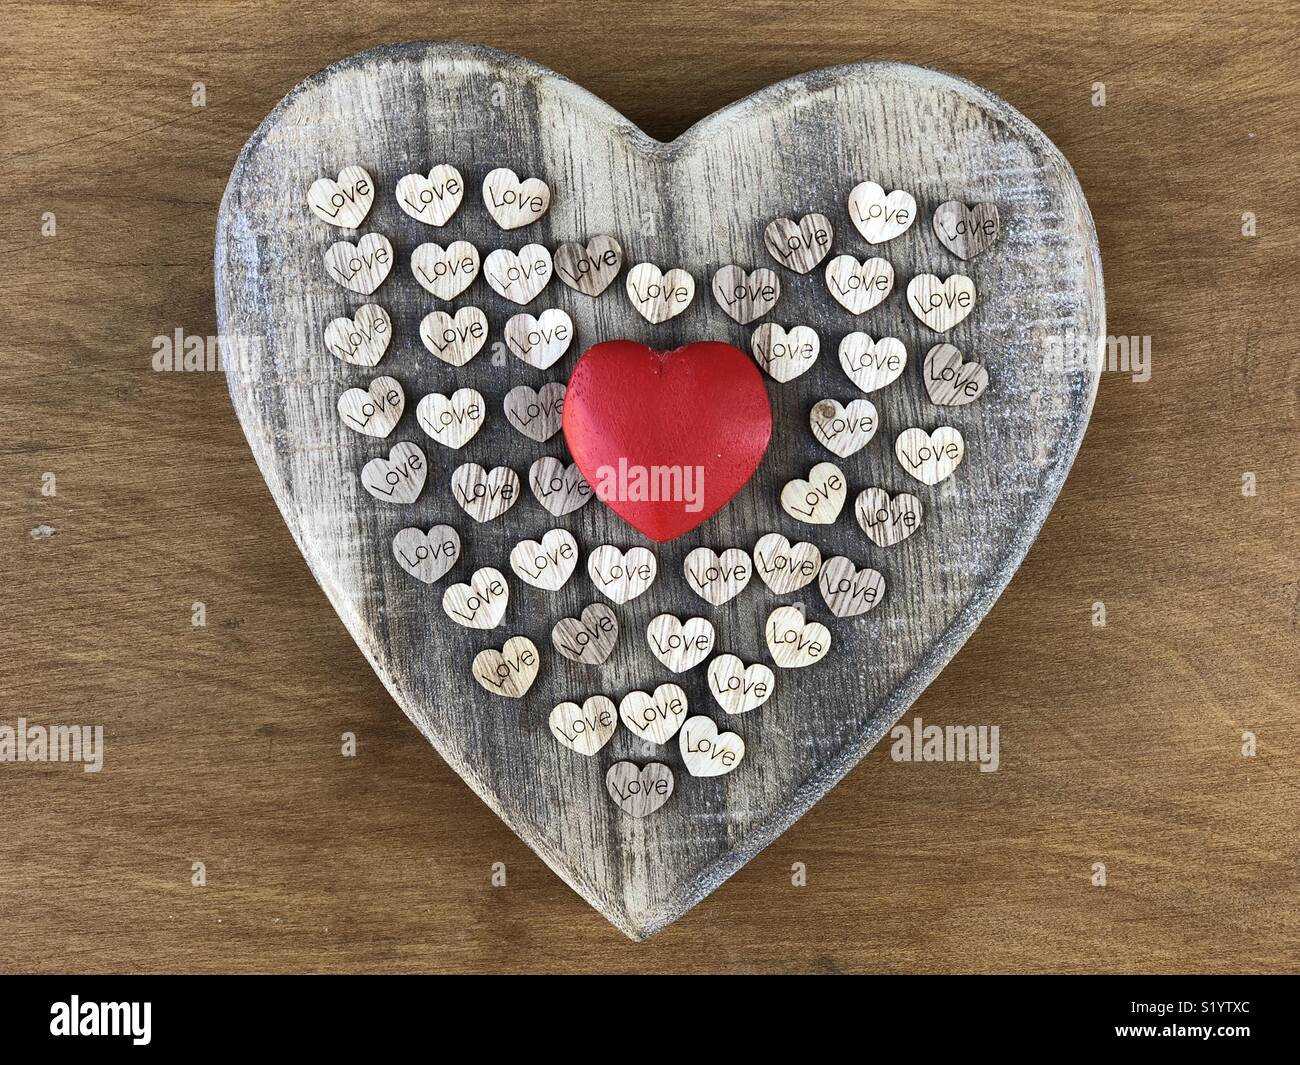 Love concept with wooden hearts Stock Photo